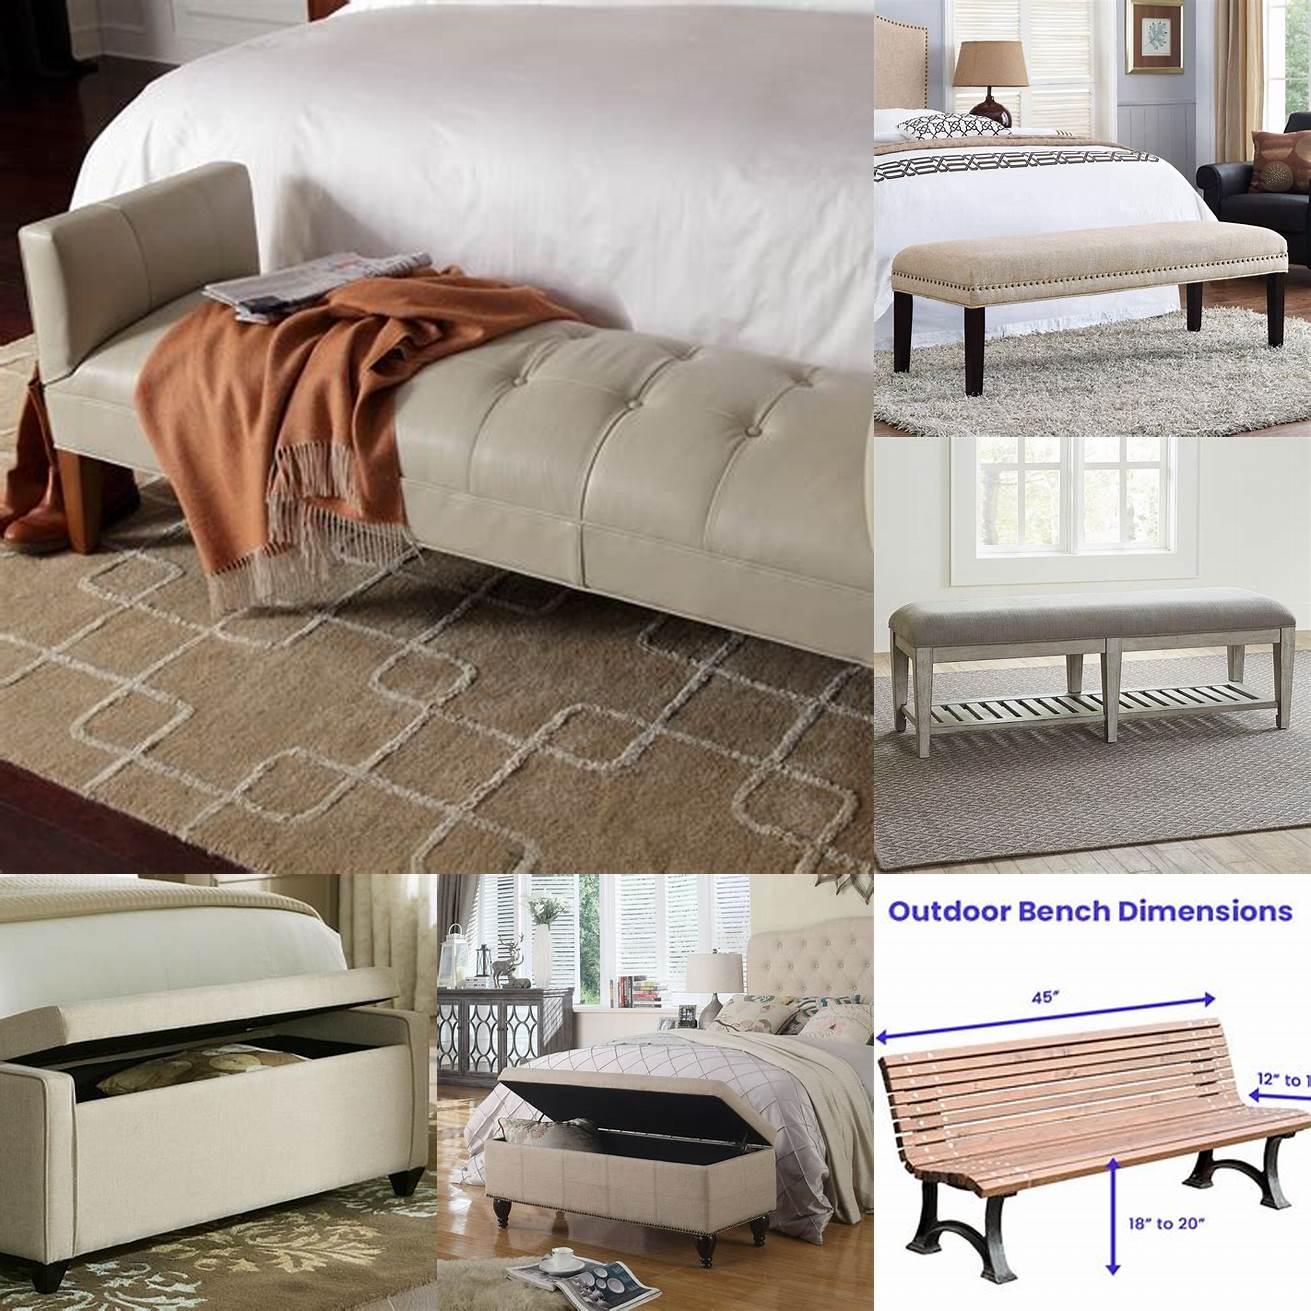 Size Make sure you measure the available space at the foot of your bed and choose a bench that fits comfortably